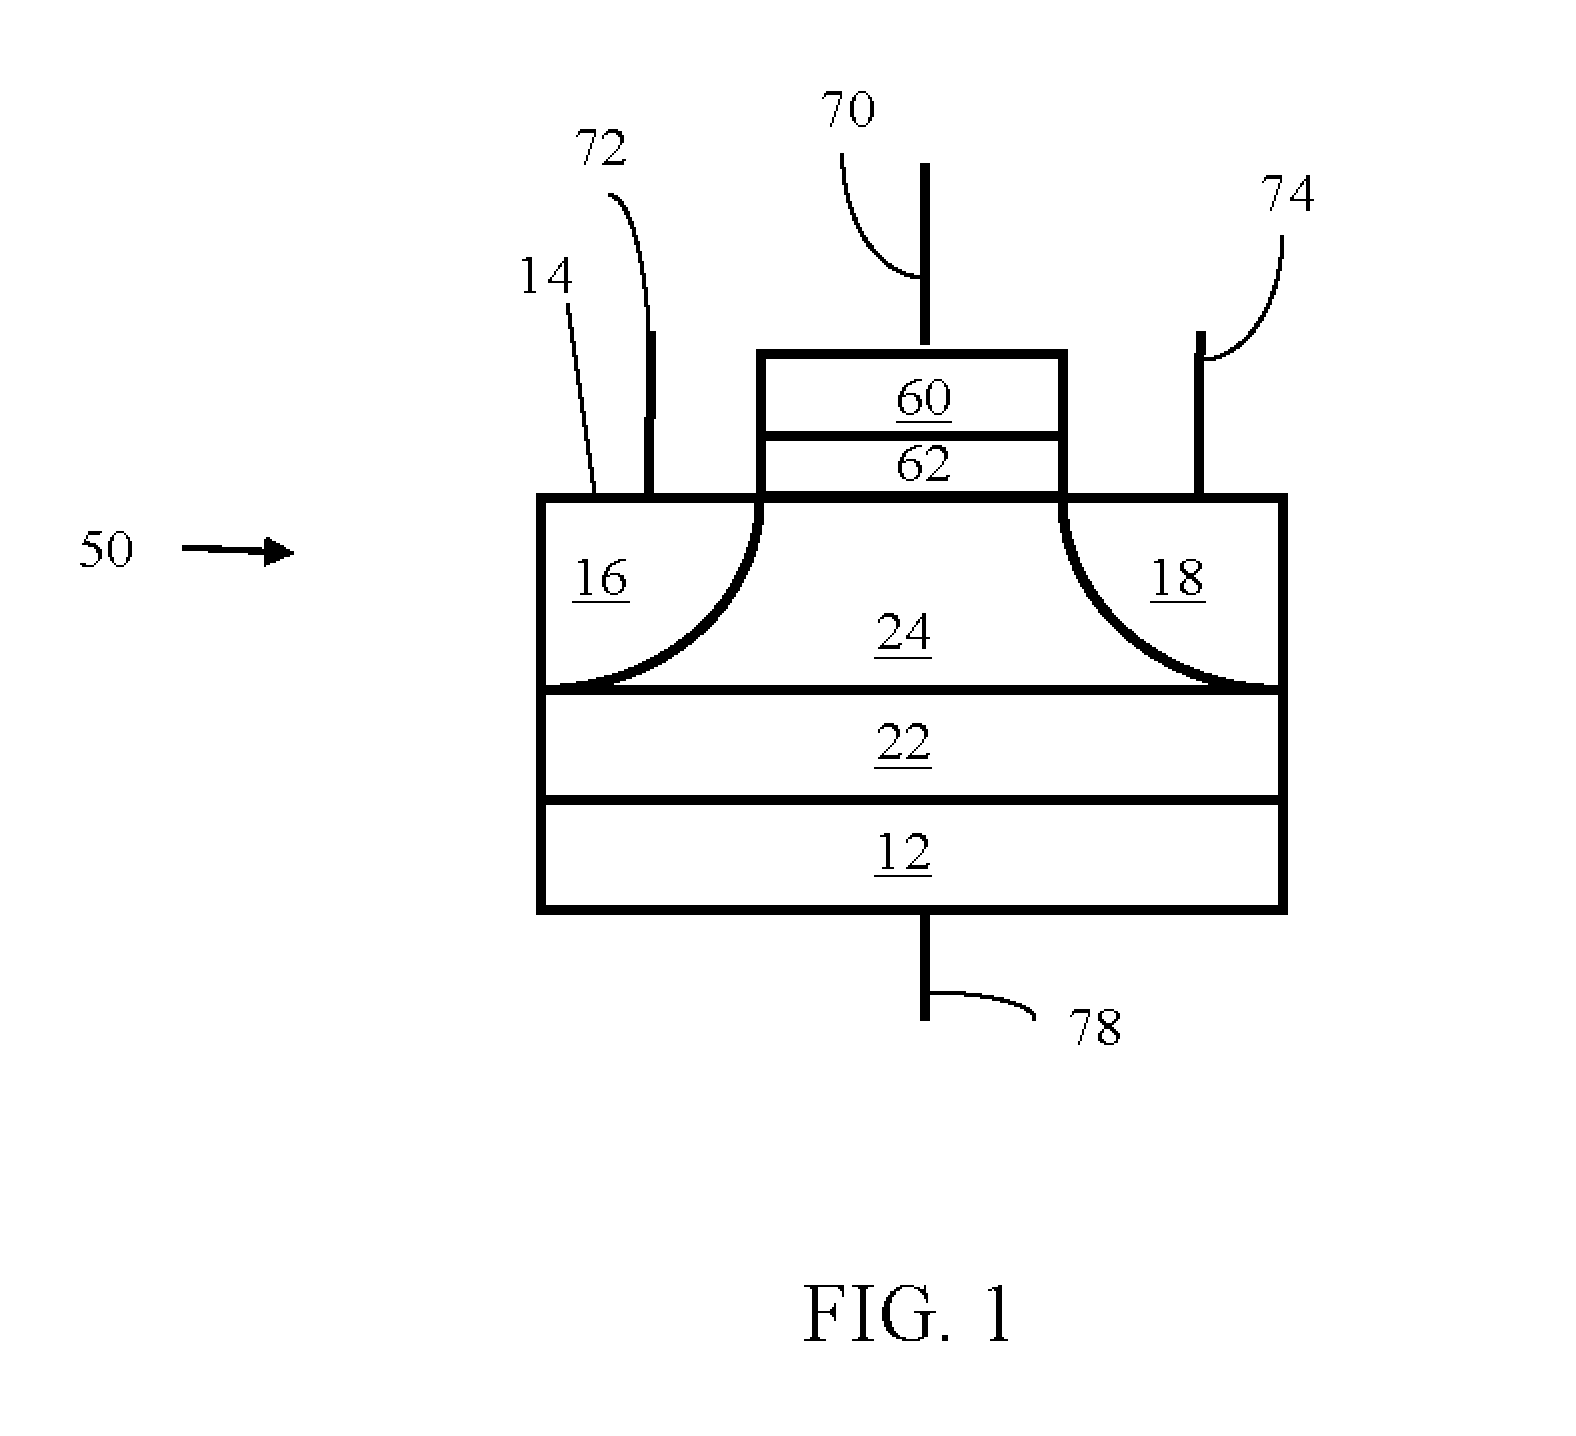 Compact semiconductor memory device having reduced number of contacts, methods of operating and methods of making